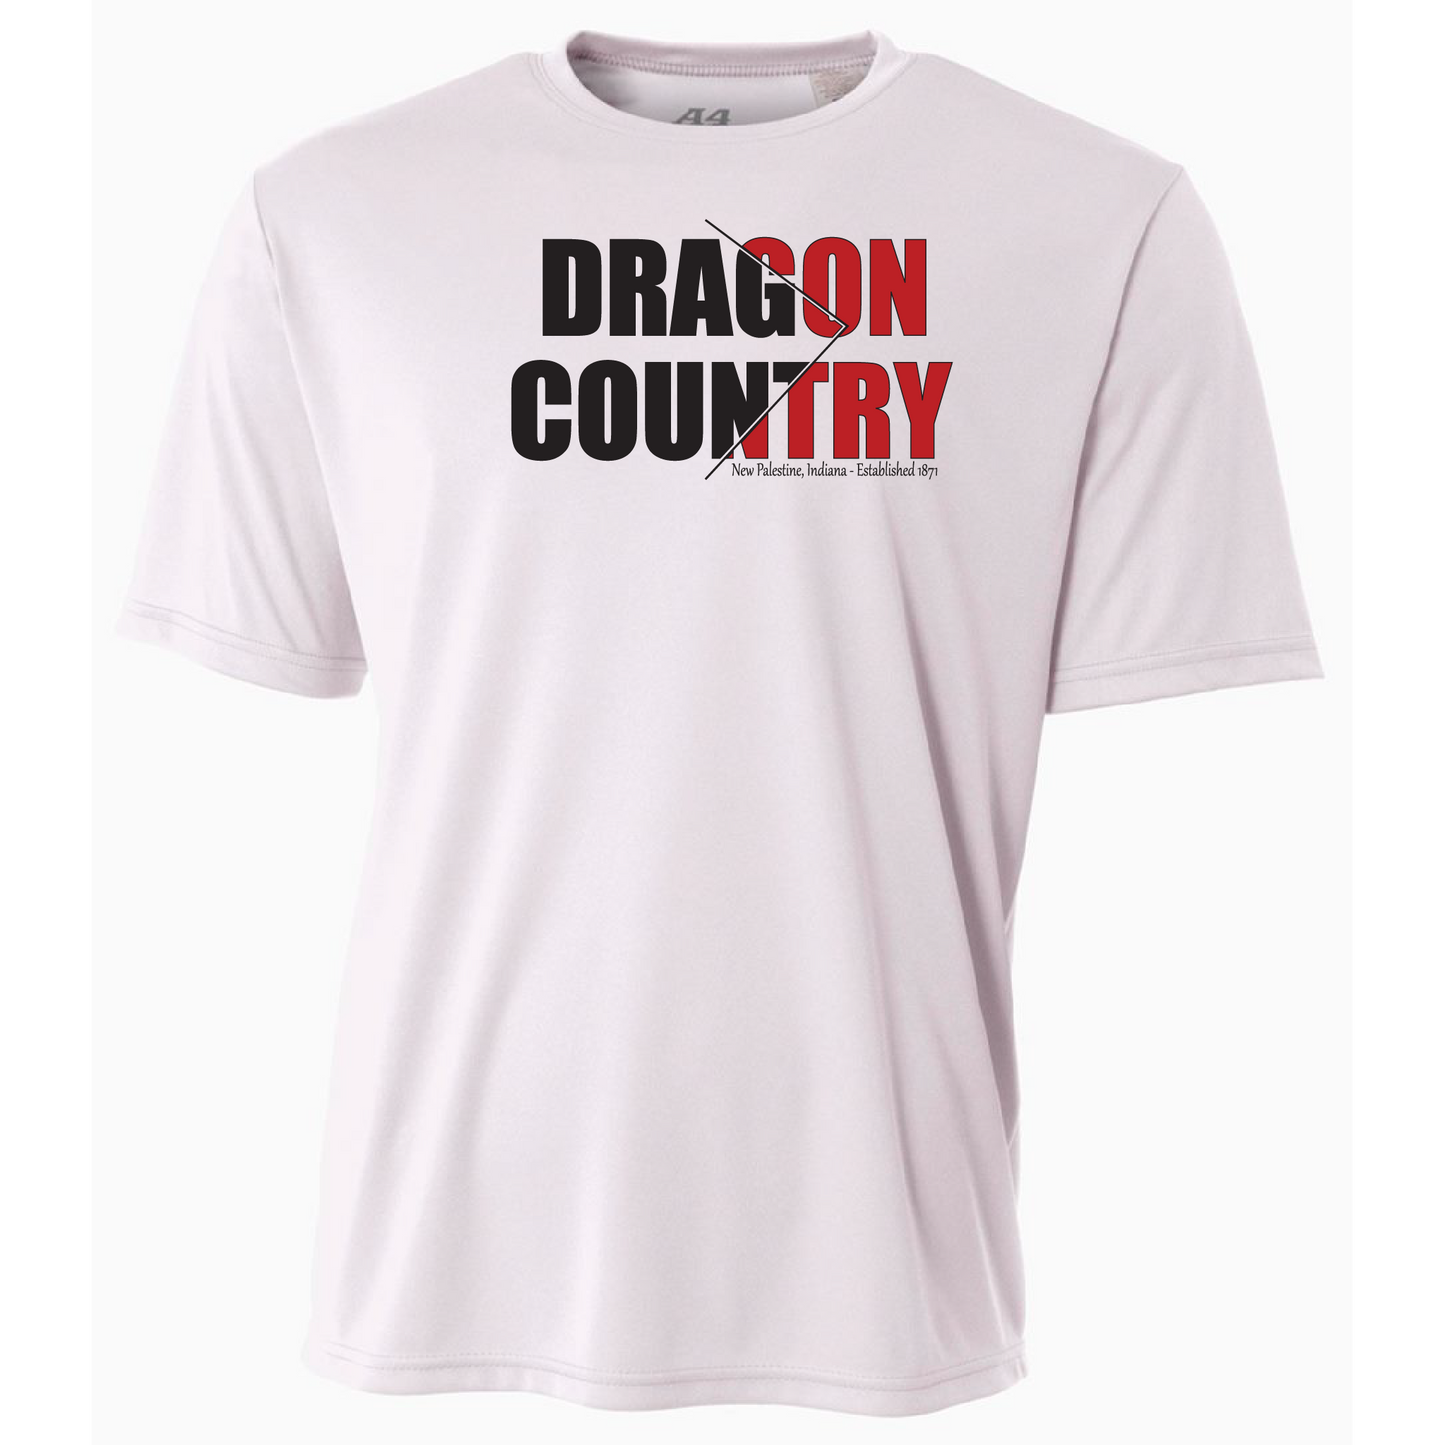 Mens S/S T-Shirt - Dragon Country Arrowed